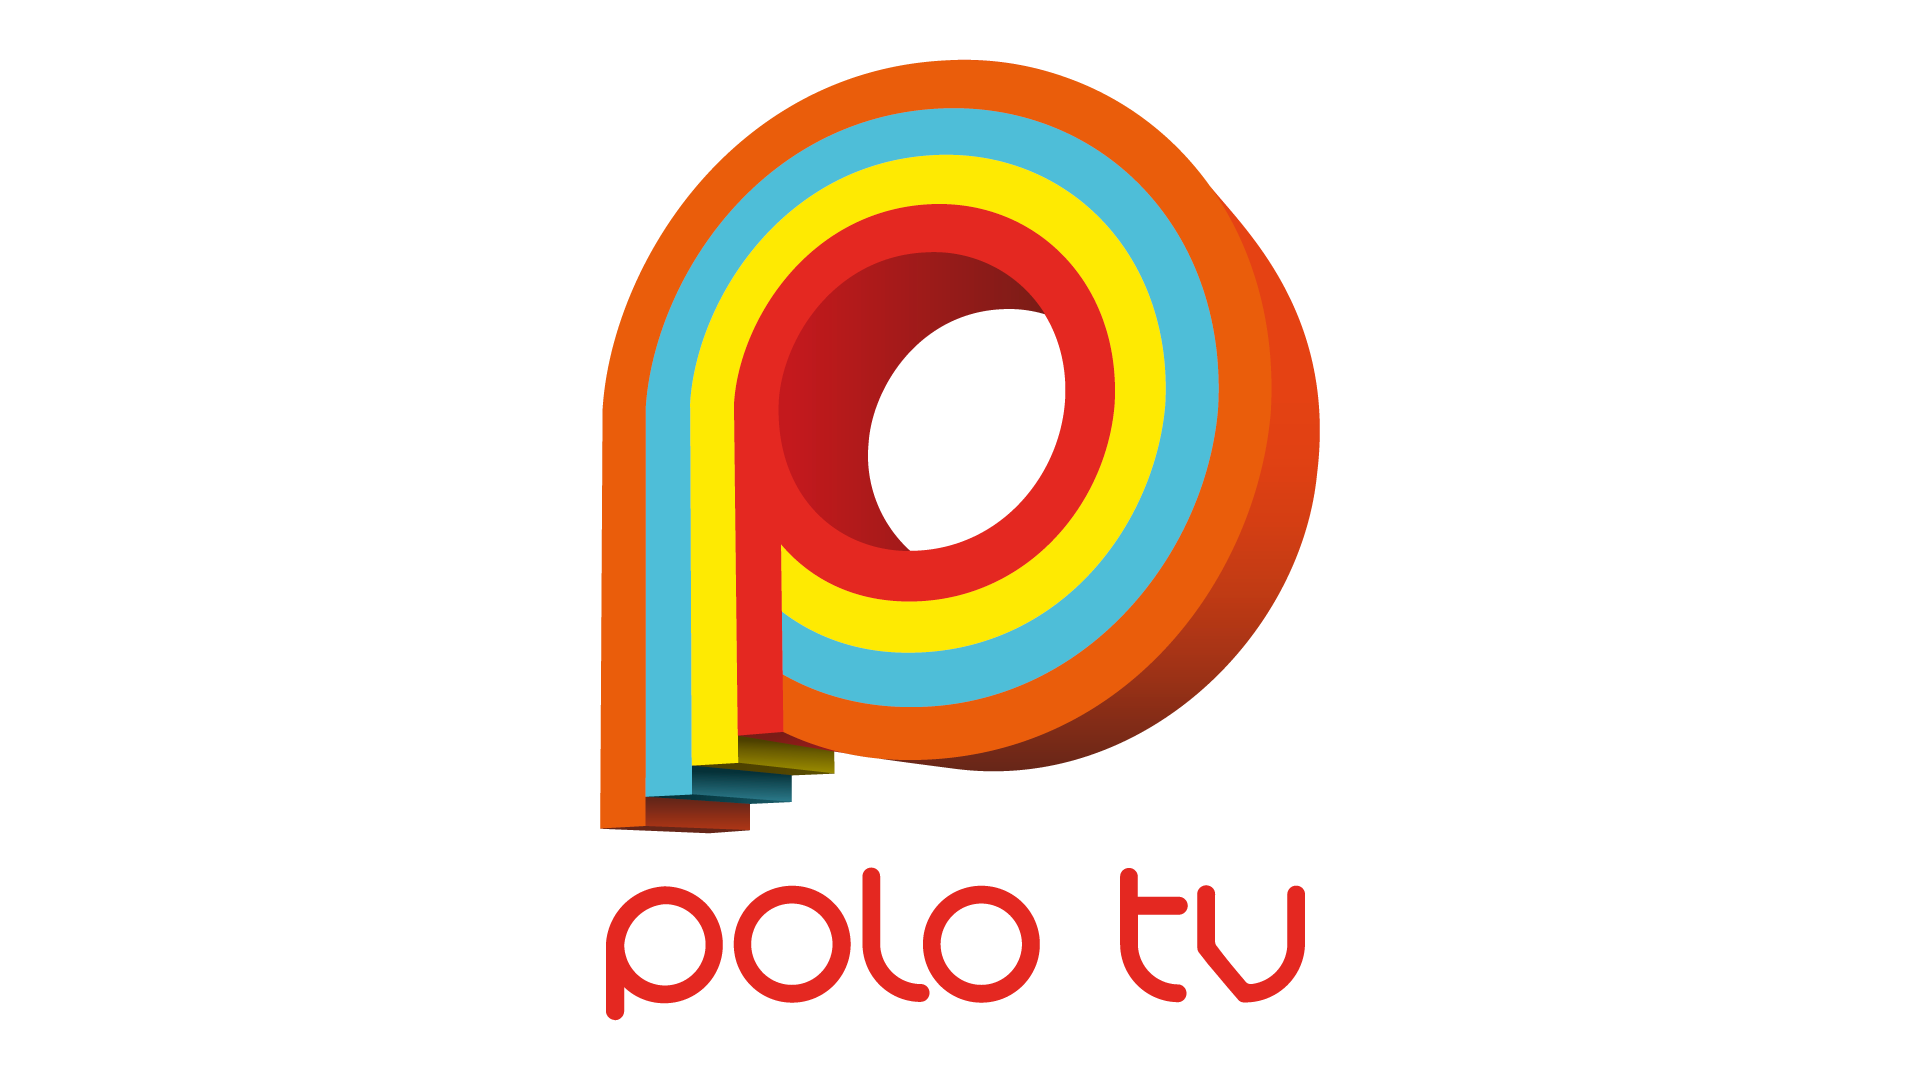 Polo TV Live TV, Online